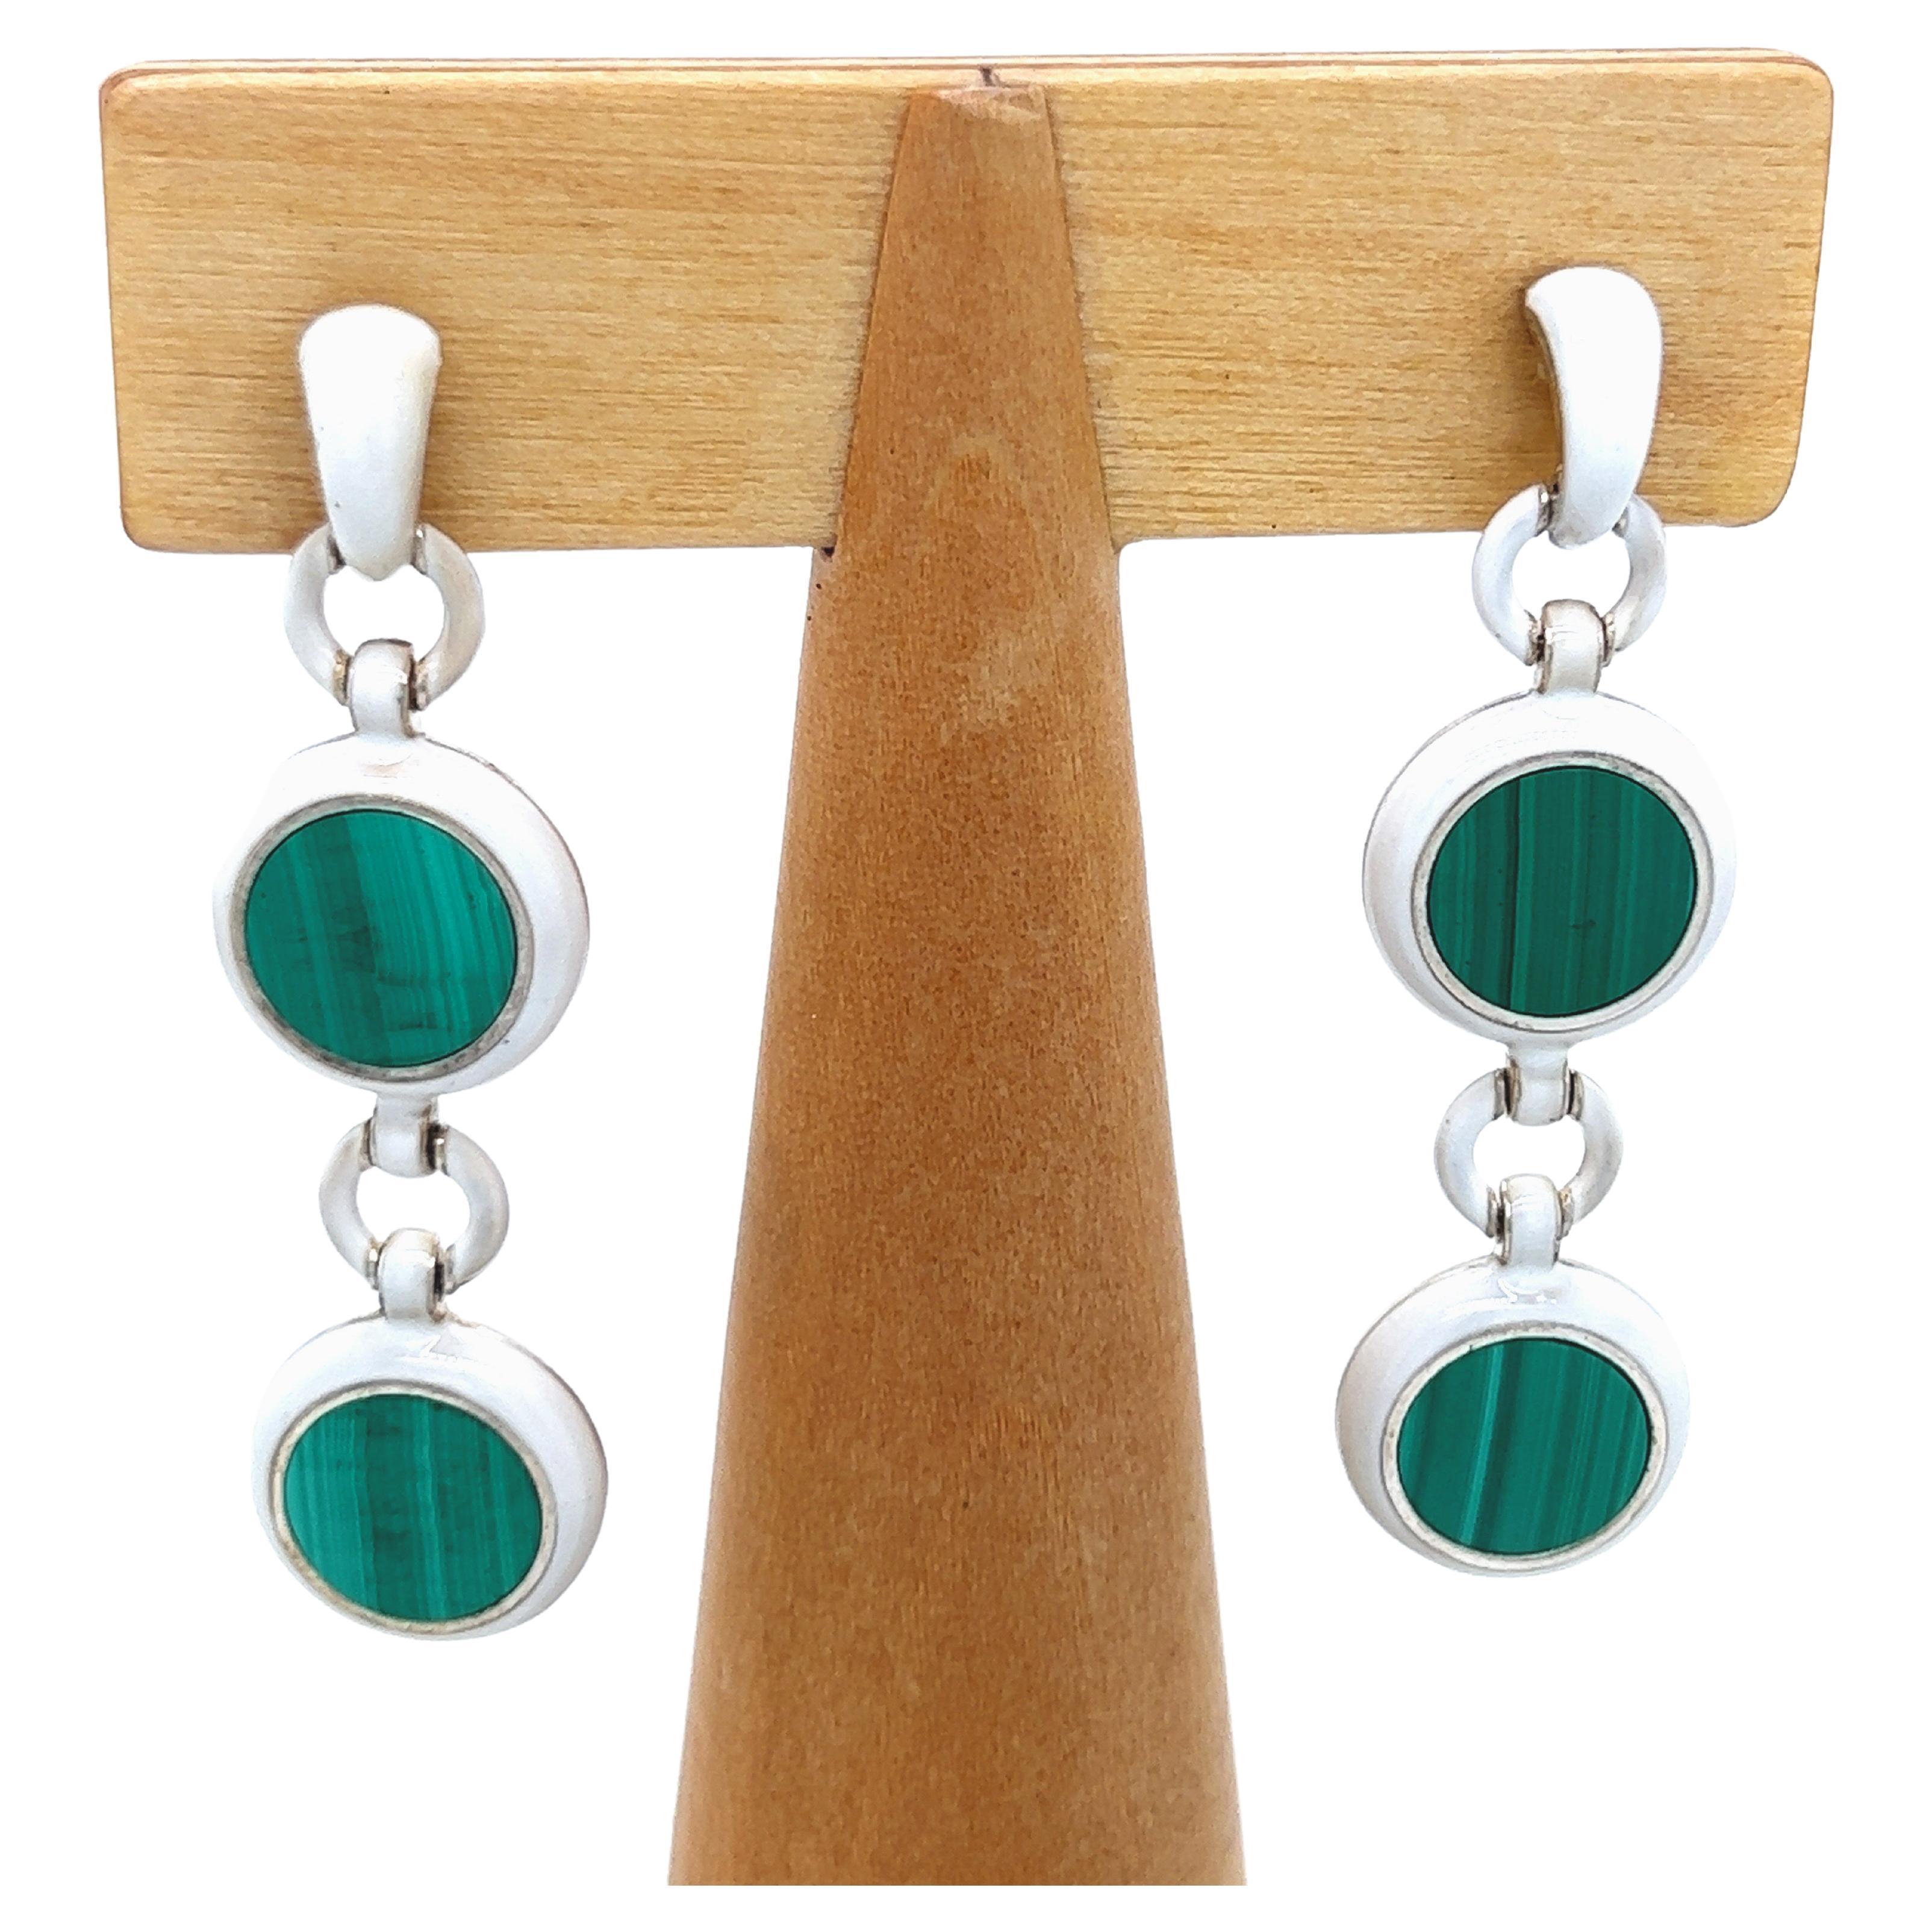 Chic yet Timeless Dangle Earrings Featuring 5Carat Natural Hand Inlaid Round Malachite Disk in a White Hand Enameled Sterling Silver Setting.
In our Precious Handcrafted tobacco Suede Leather Box.


Total Lenght 1.968 inches, 5cm